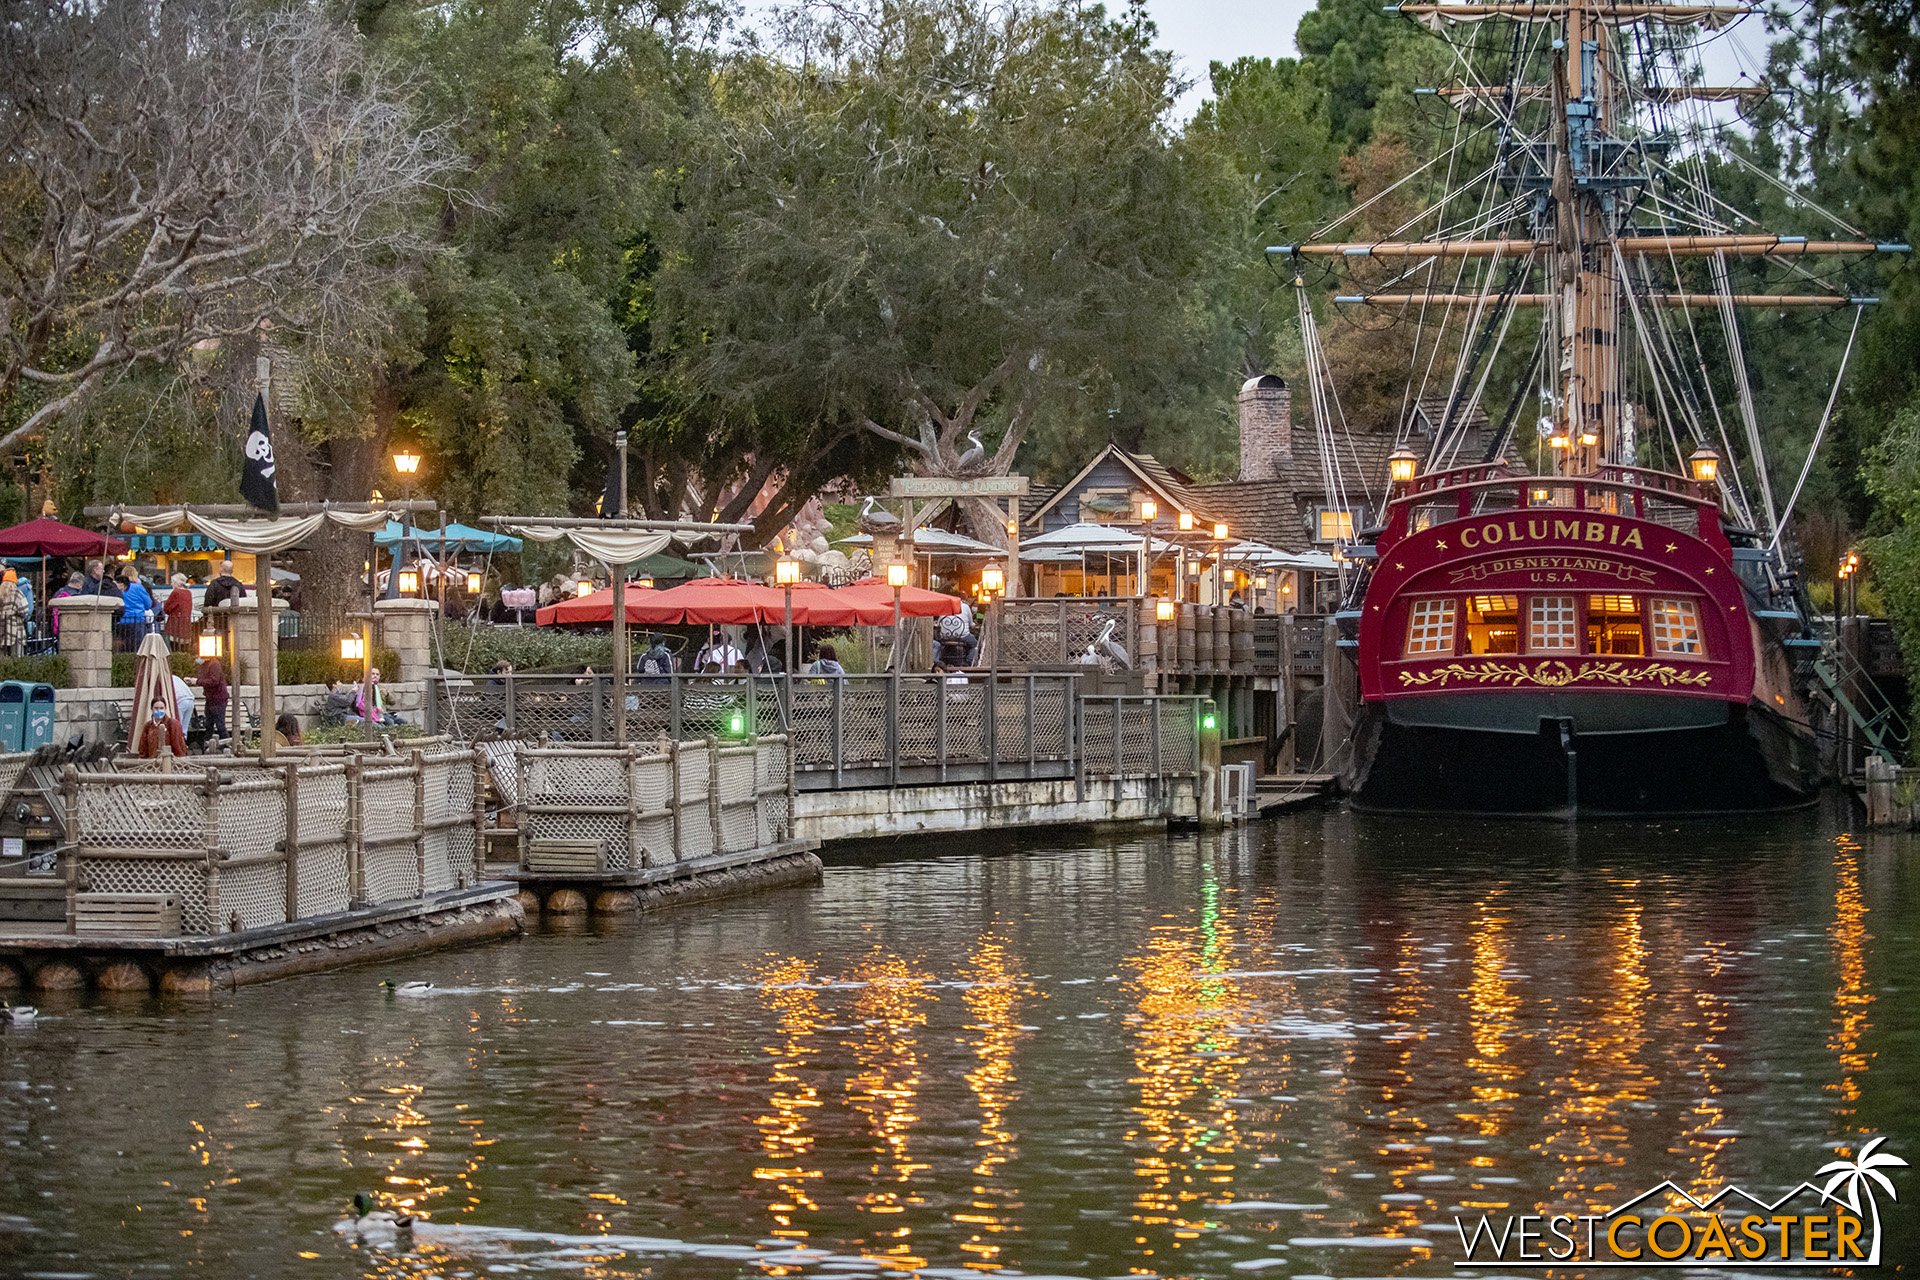  Although primarily meant to accommodate Harbour Galley, this area can also be overflow for French Market diners who can’t find a table on that side of New Orleans Square. 